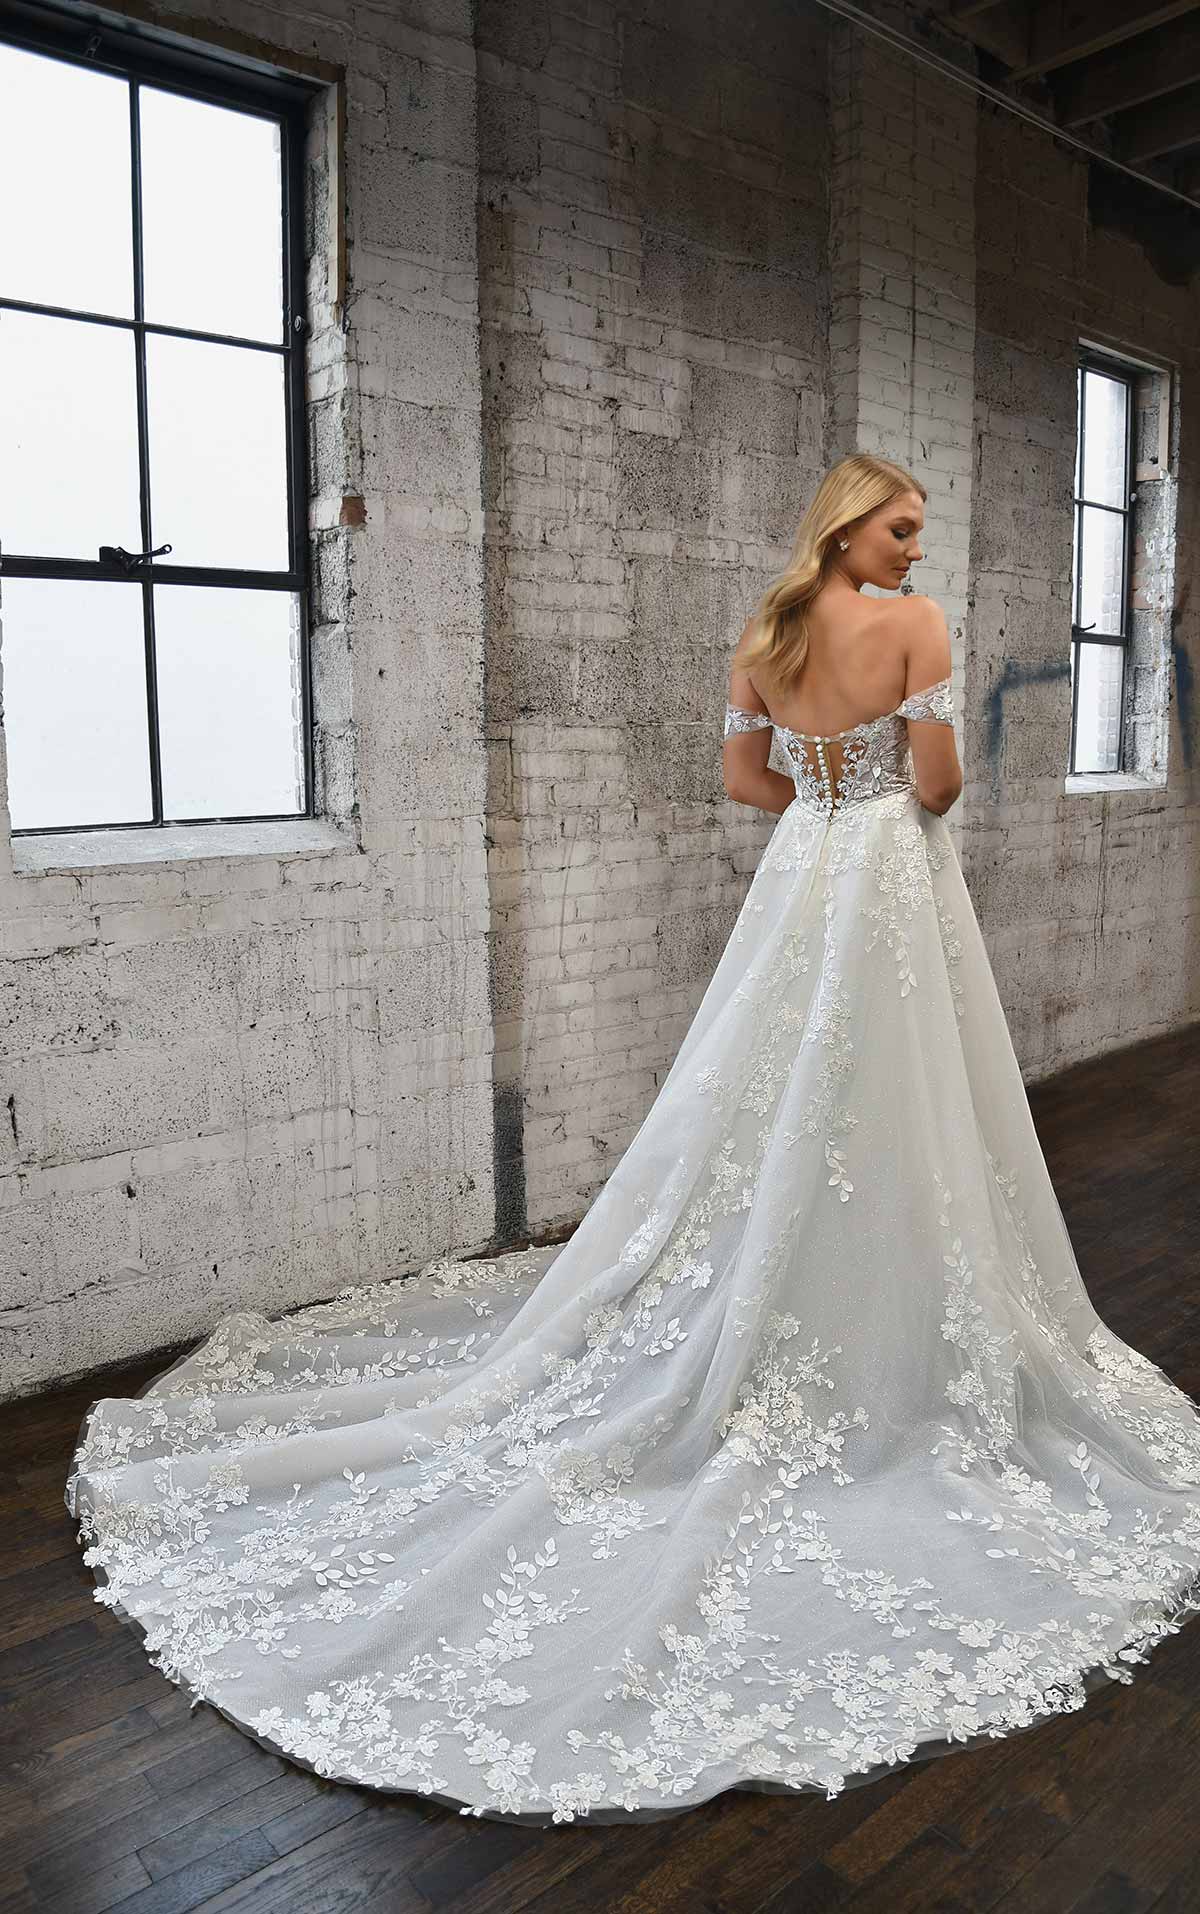 1342 Sweetheart Off-the-Shoulder Wedding Dress with Floral Lace Details by Martina Liana